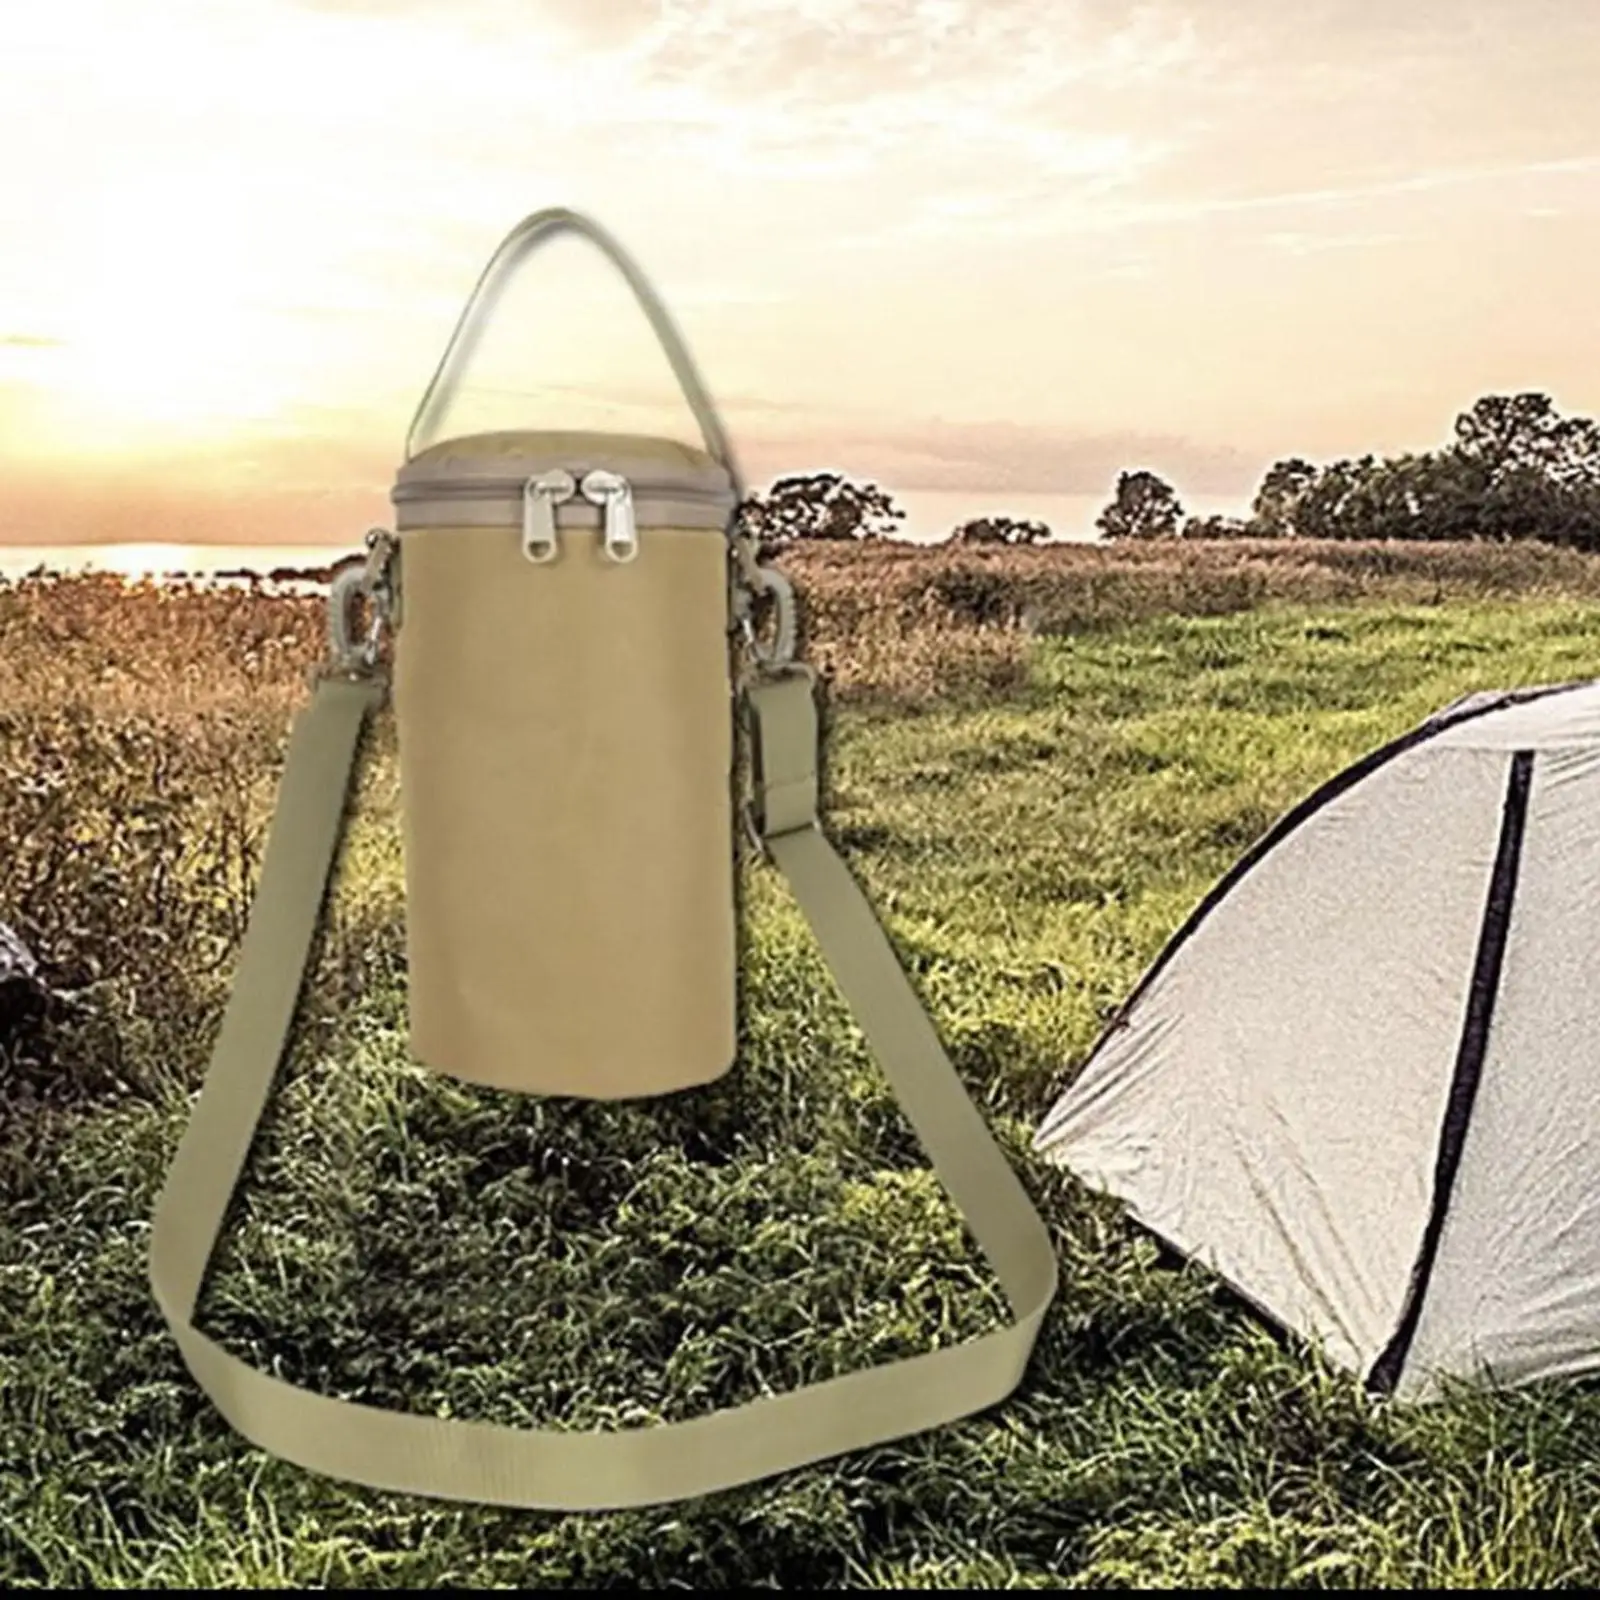 Portable Gas Tank Protective Case Fuel Cylinder Camping Lantern 